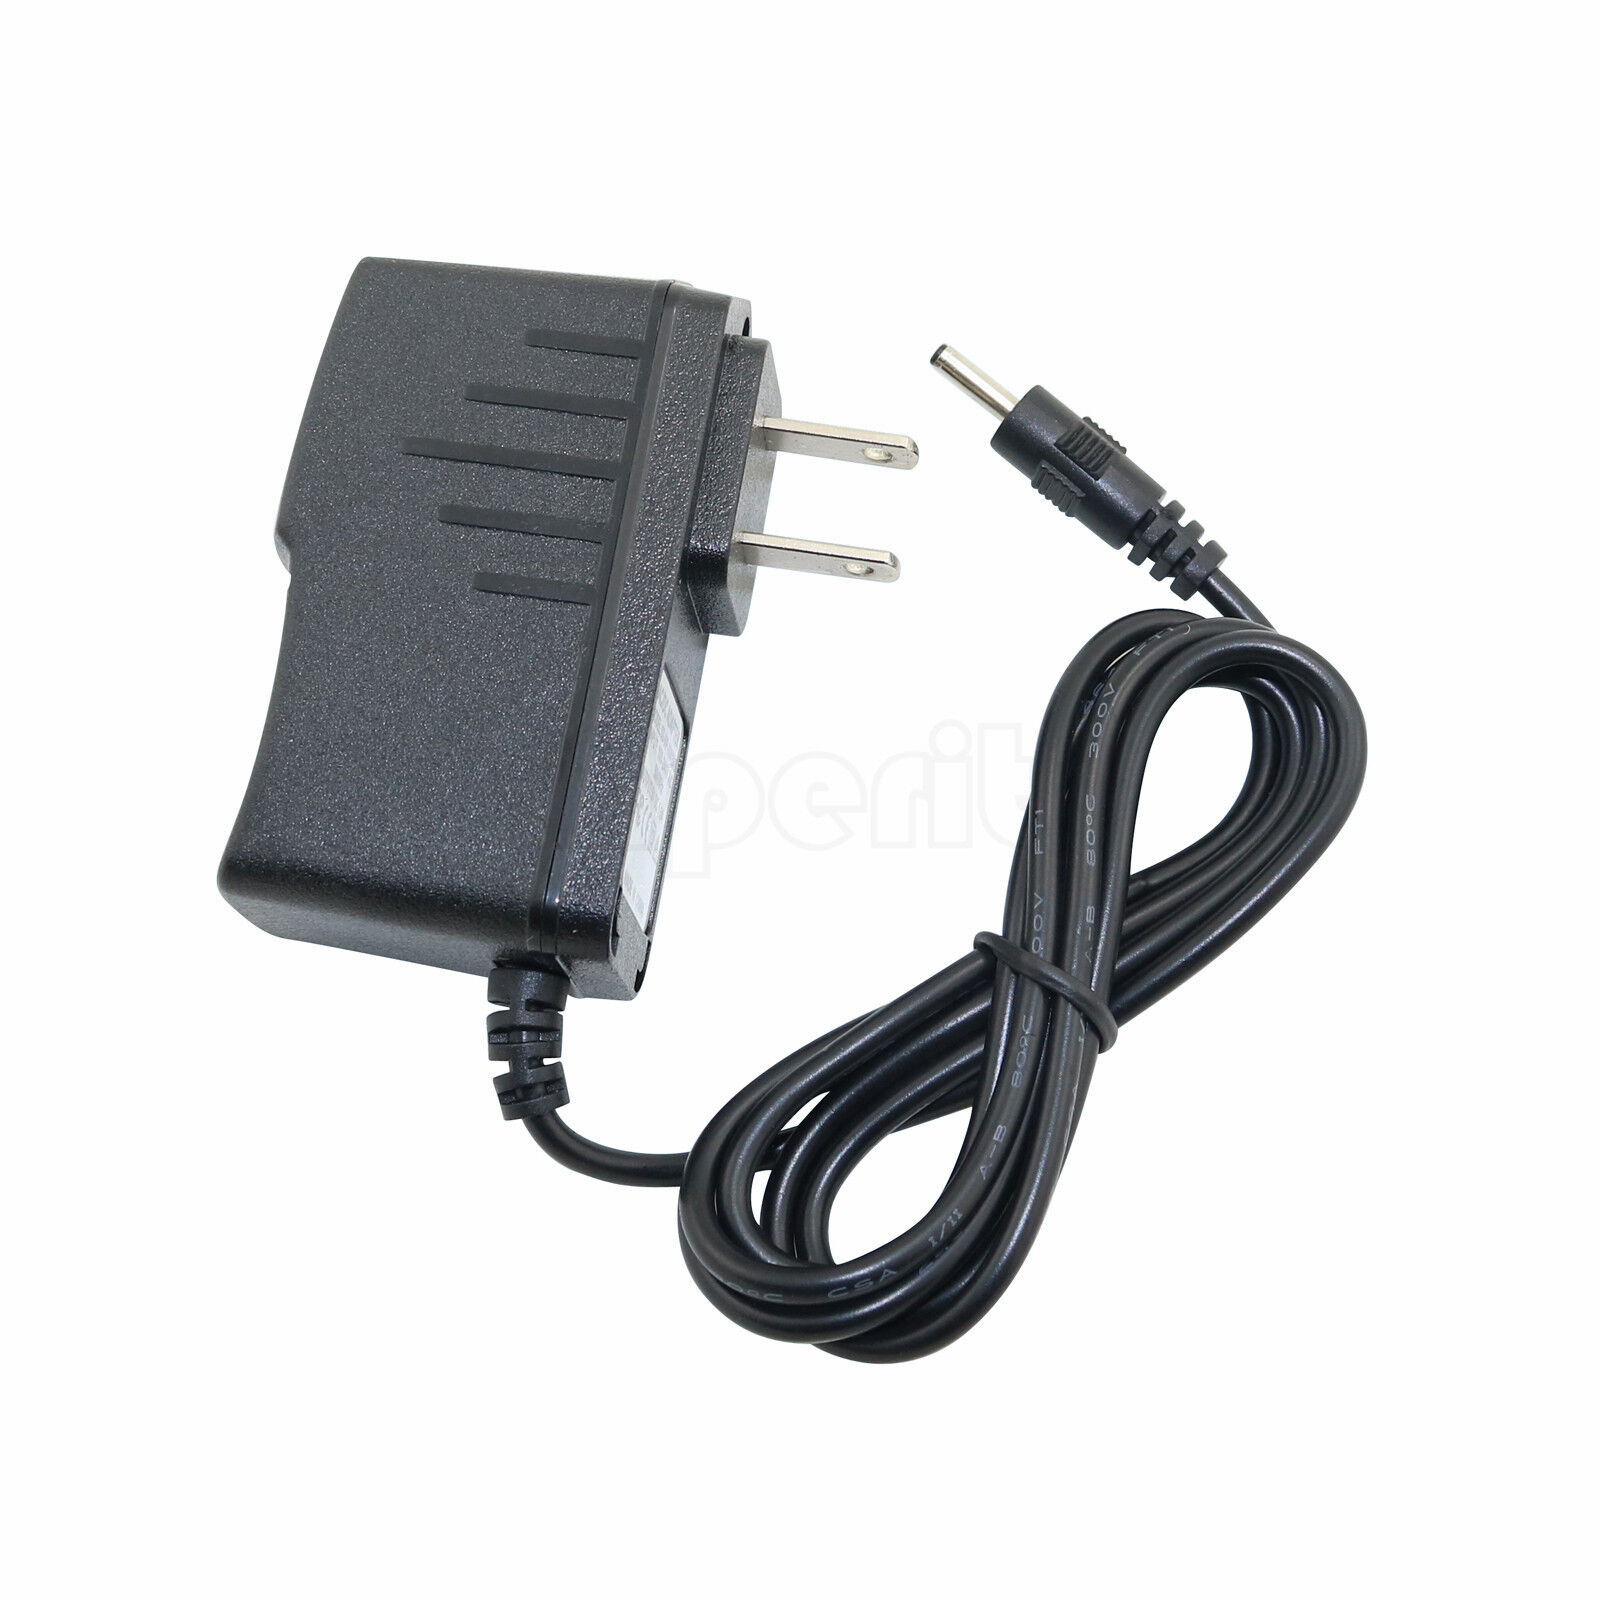 AC/DC Power Supply Adapter Wall Home Charger Cord For RCA 7" / 9" Tablet AC/DC Power Supply Adapter Wall Home Charger C - Click Image to Close